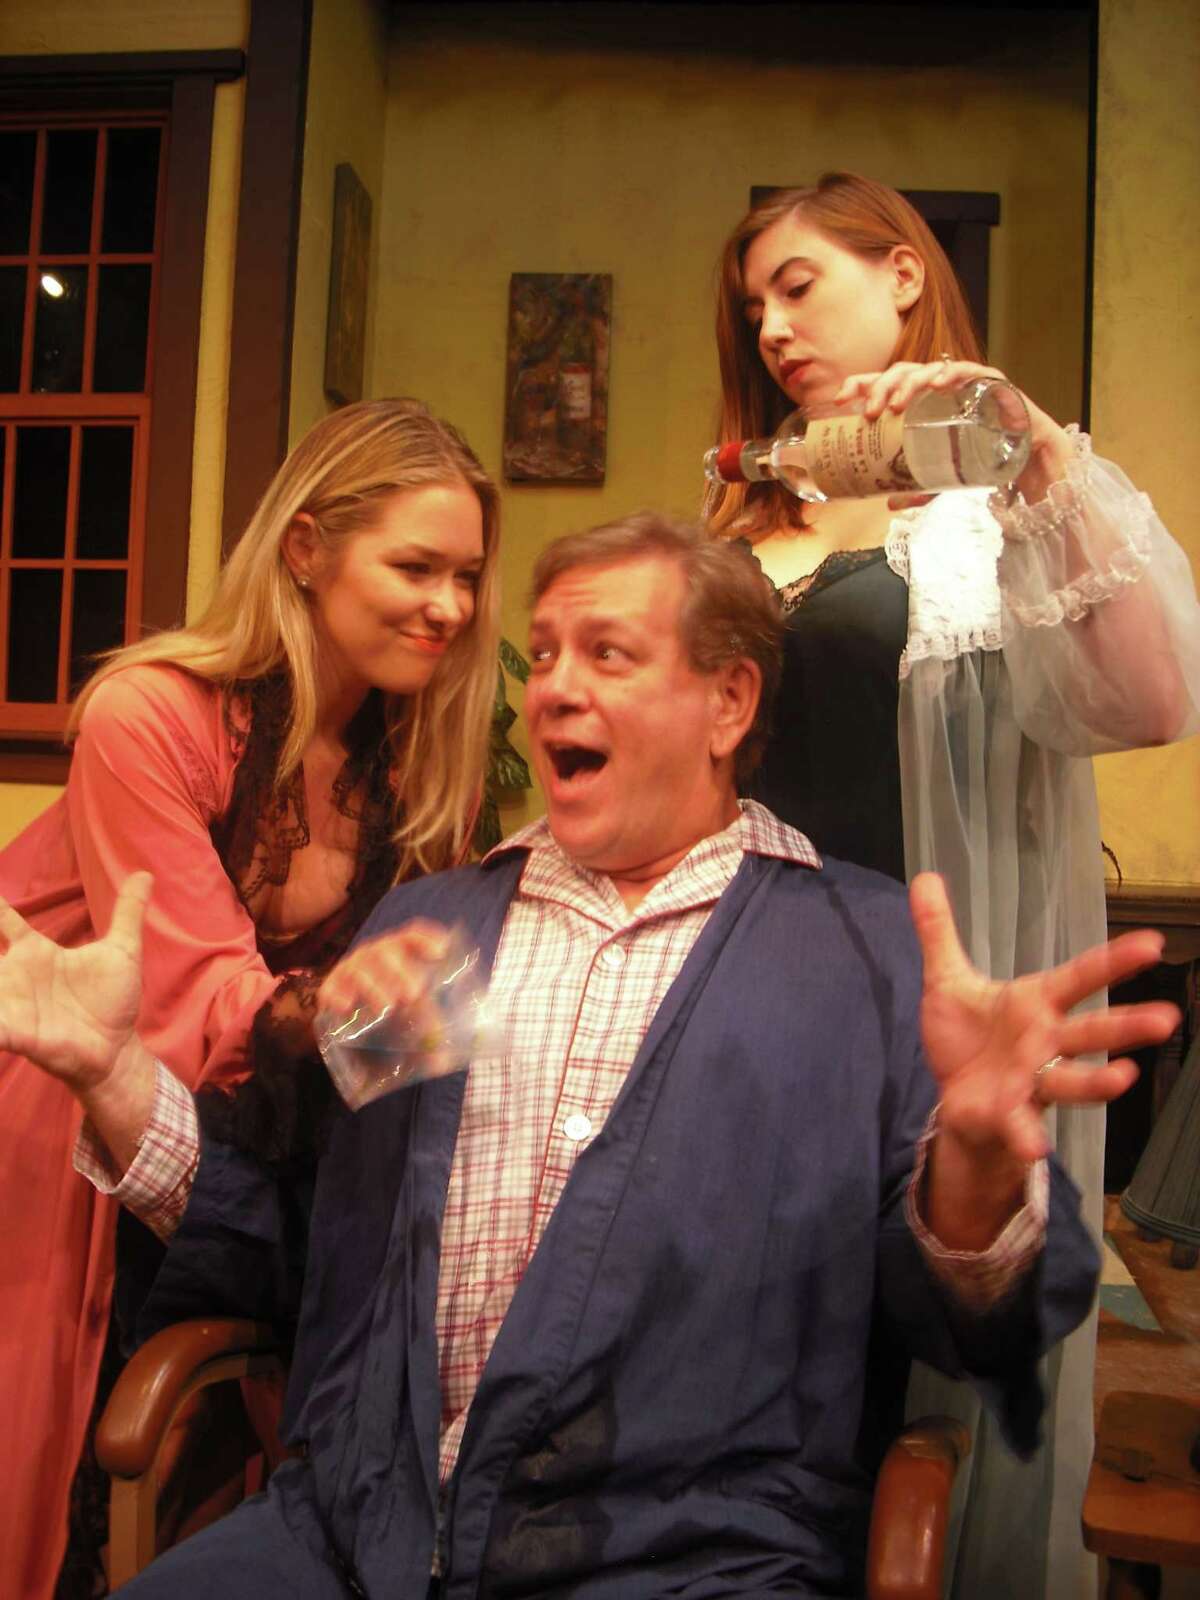 The Sheldon Vexler Theatre kicks off its 2017-'18 season with "Don't Dress for Dinner," Marc Camoletti's farce in which a romantic tryst between a man and his mistress that goes awry when the man's wife unexpectedly turns up. Richard Sodders, who teaches theater at Texas State University in San Marcos, is directing. Opens today. 7:30 p.m. Thursdays, 8 p.m. Saturdays and 2:30 p.m. Sundays through Sept. 10, Sheldon Vexler Theatre, 12500 N.W. Military. $15 to $23. 210-302-6835 for reservations; www.vexler.org for more info. -- Deborah Martin